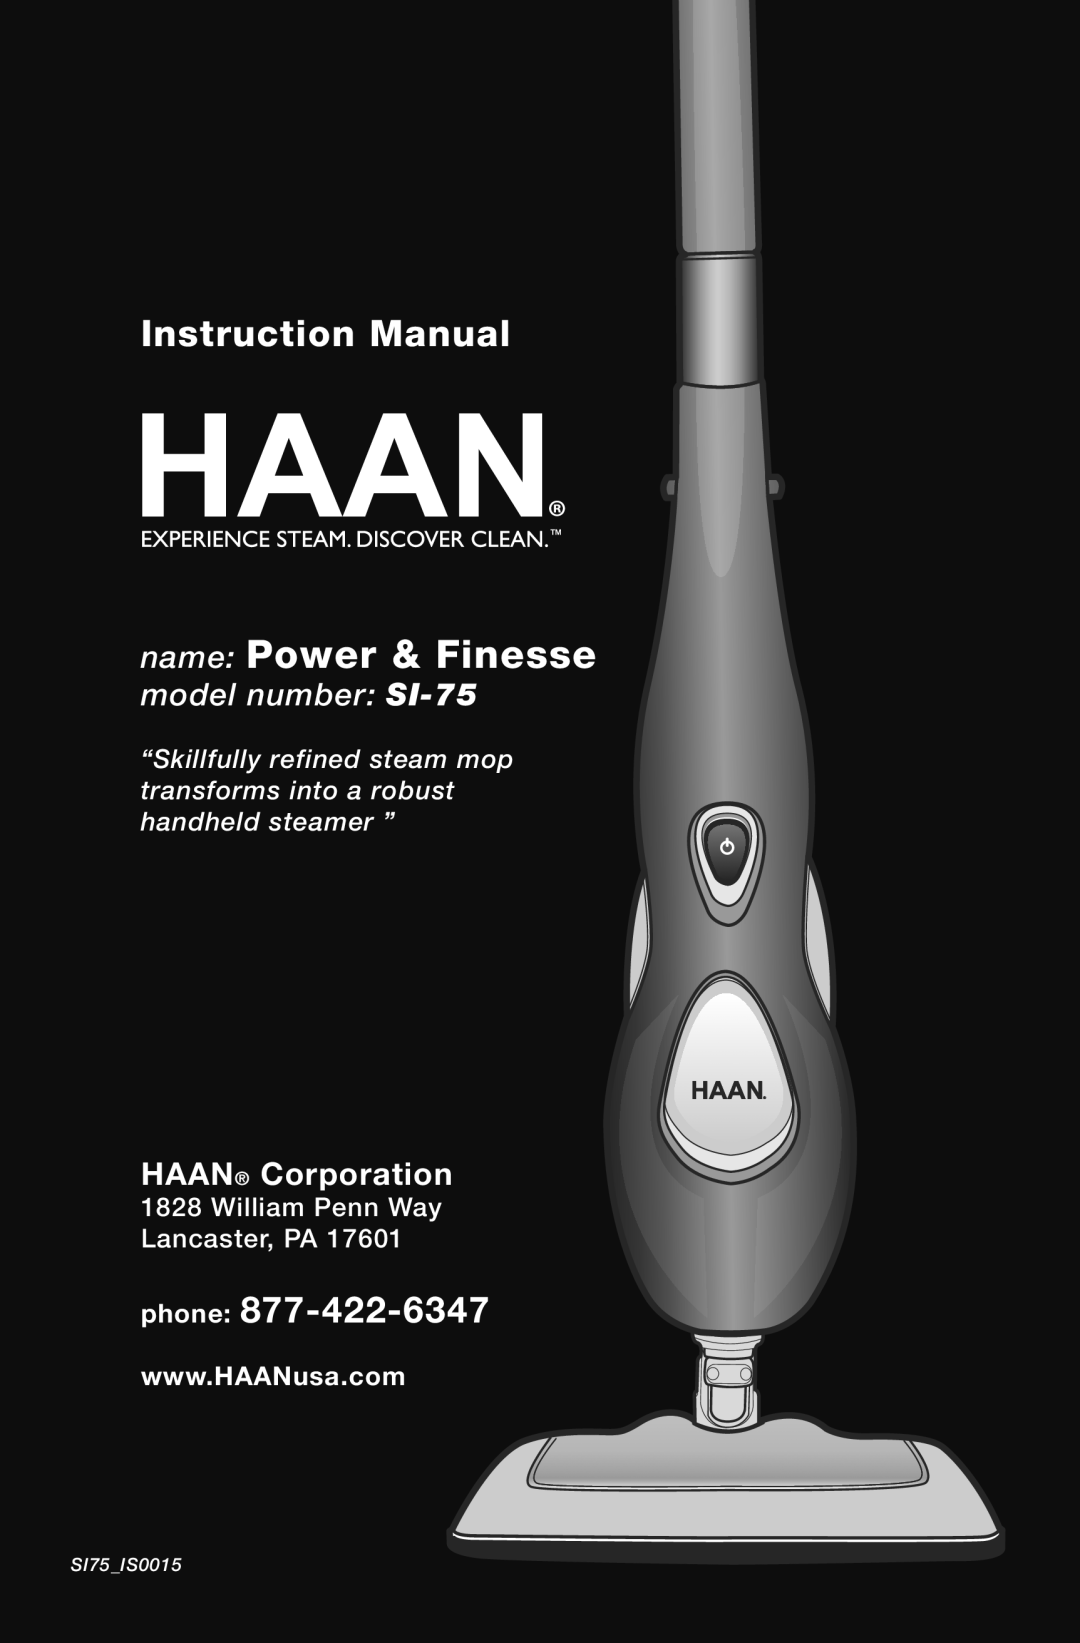 Haan instruction manual Instruction Manual, phone, HAAN Corporation, name Power & Finesse, model number SI-75 